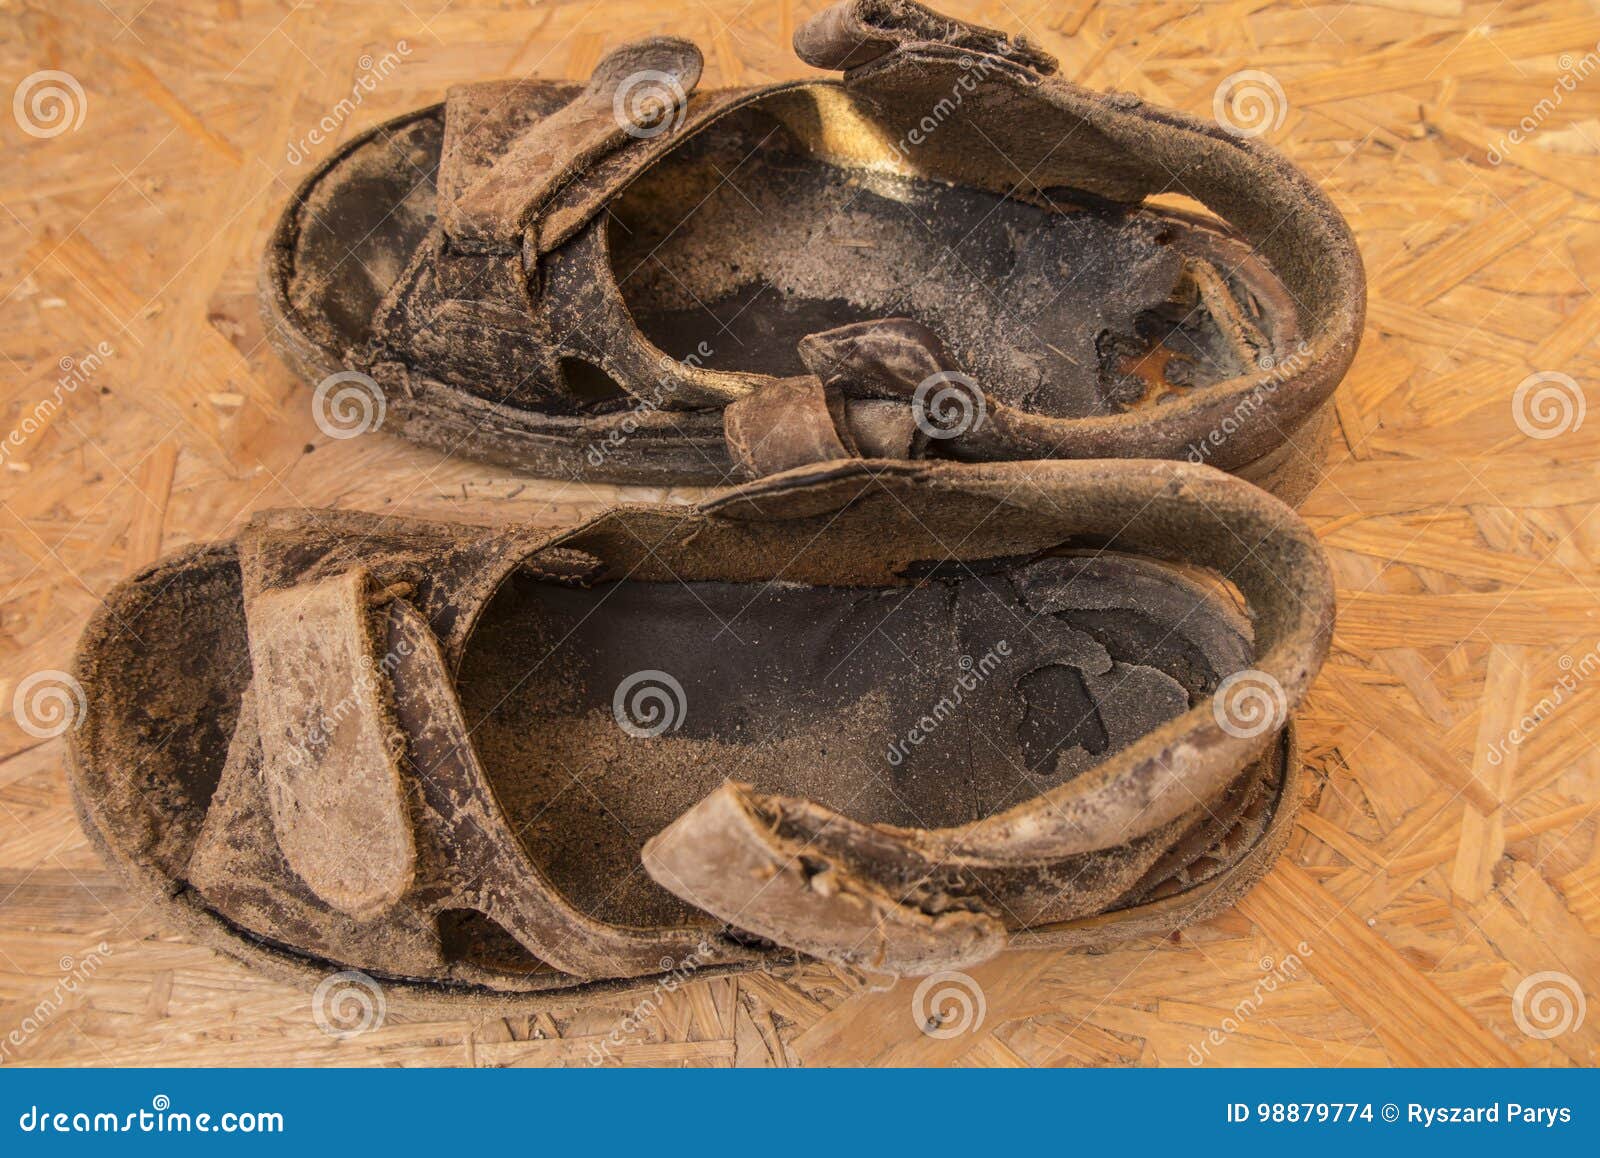 Sandals Old, Worn Out Being Based Stock Photo - Image of plate, skin ...